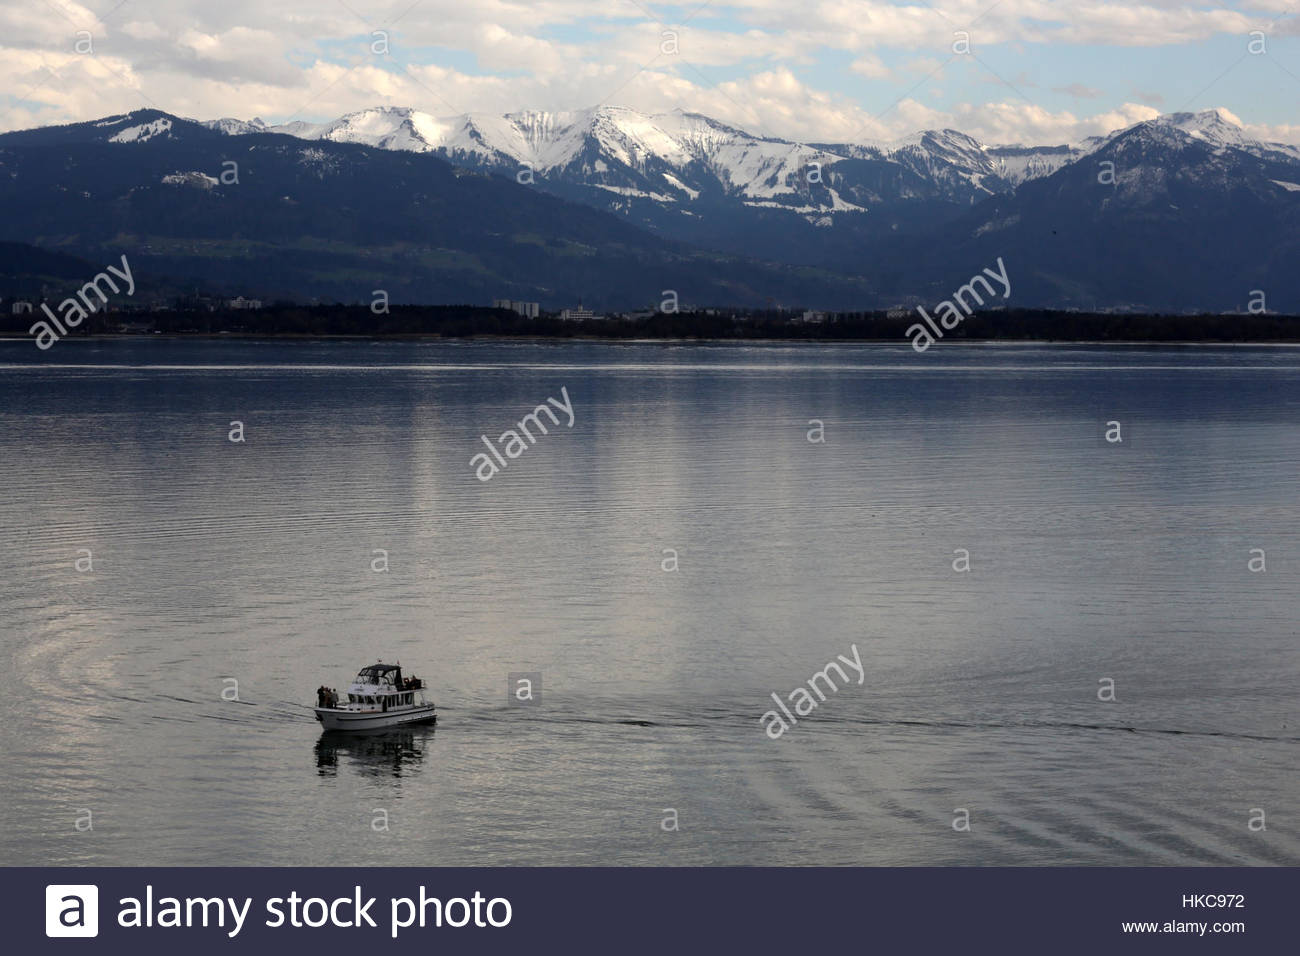 A boat on lake Constance with the snowy Alps in the background Stock Photo